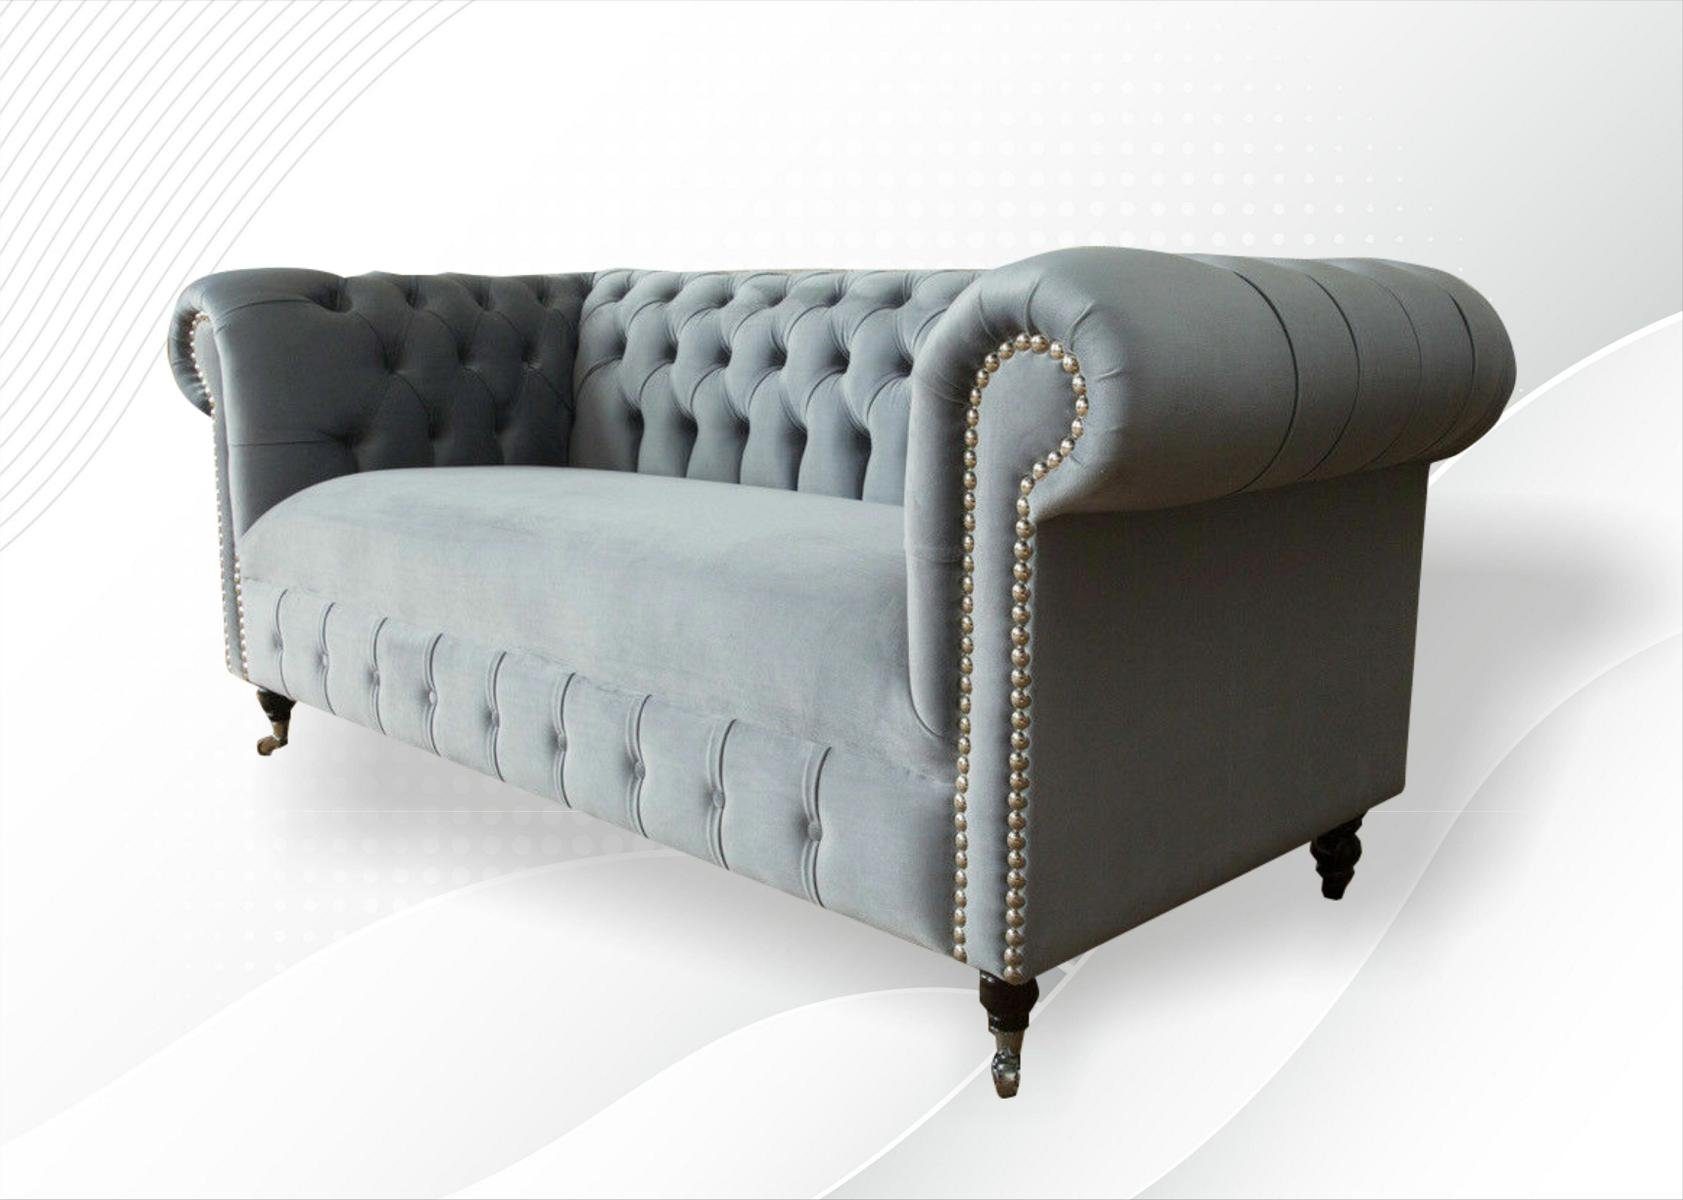 Stoff Sofa Chesterfield Europe Leder Textilmöbel, Couch in Sofa Couchen JVmoebel Polster Made